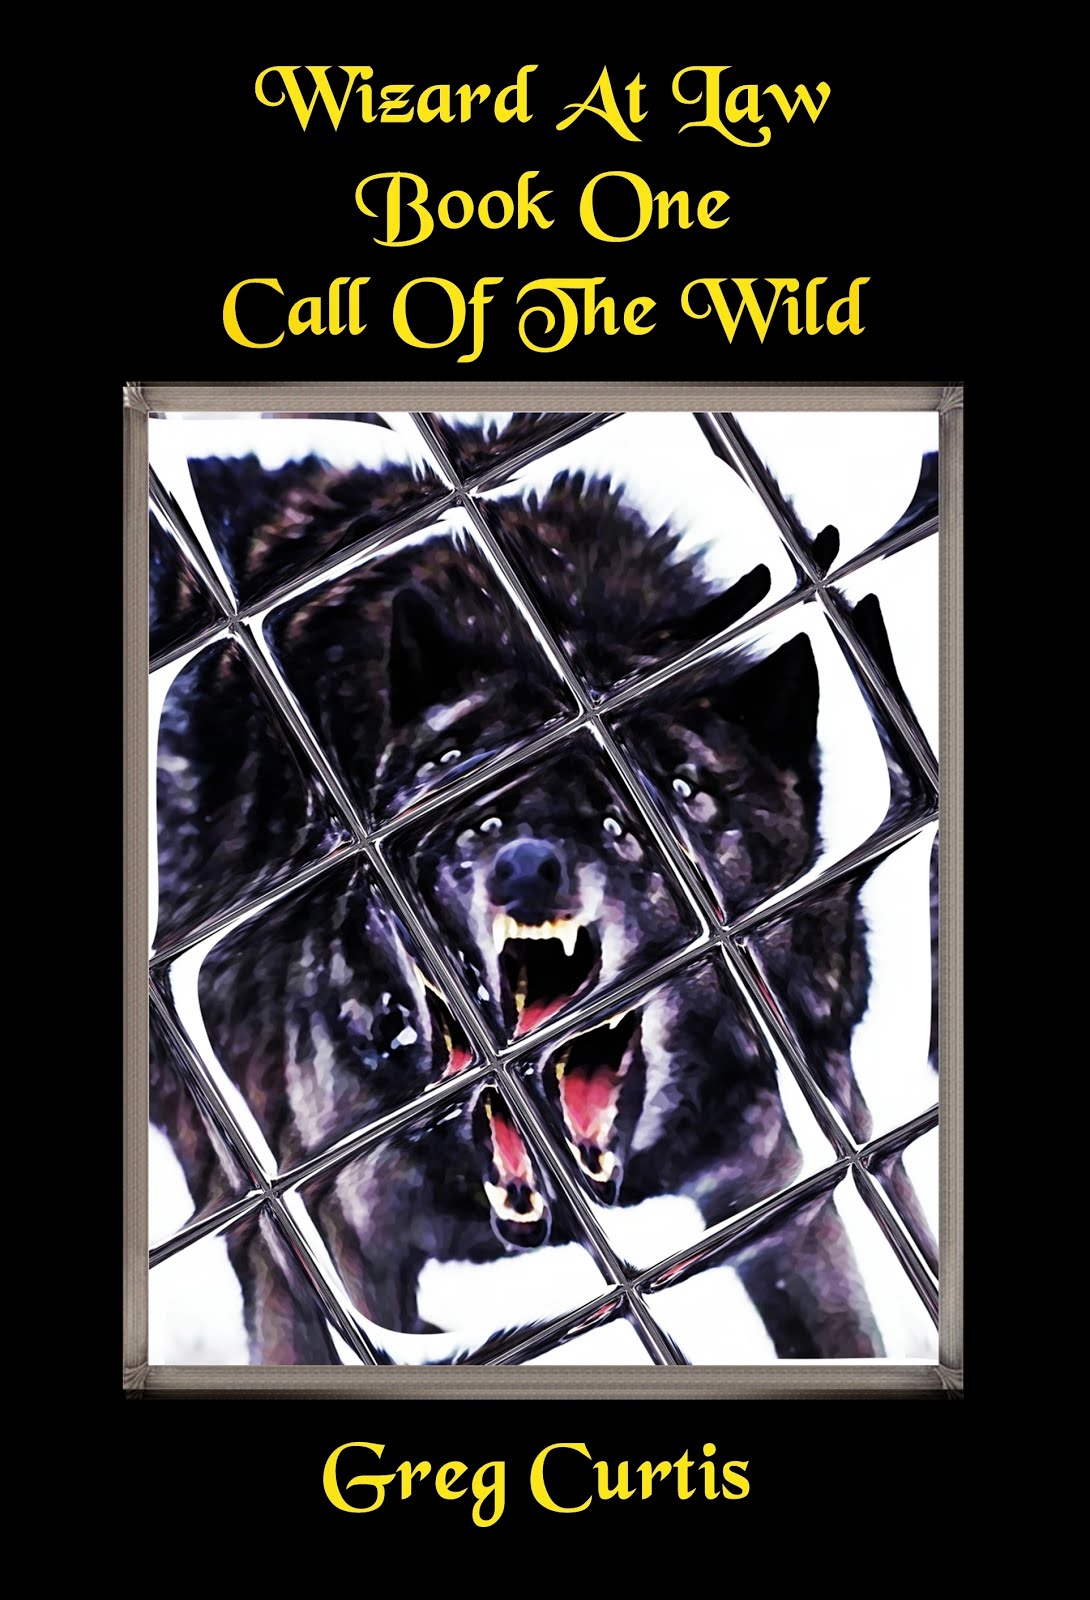 Wizard At Law: Call Of The Wild